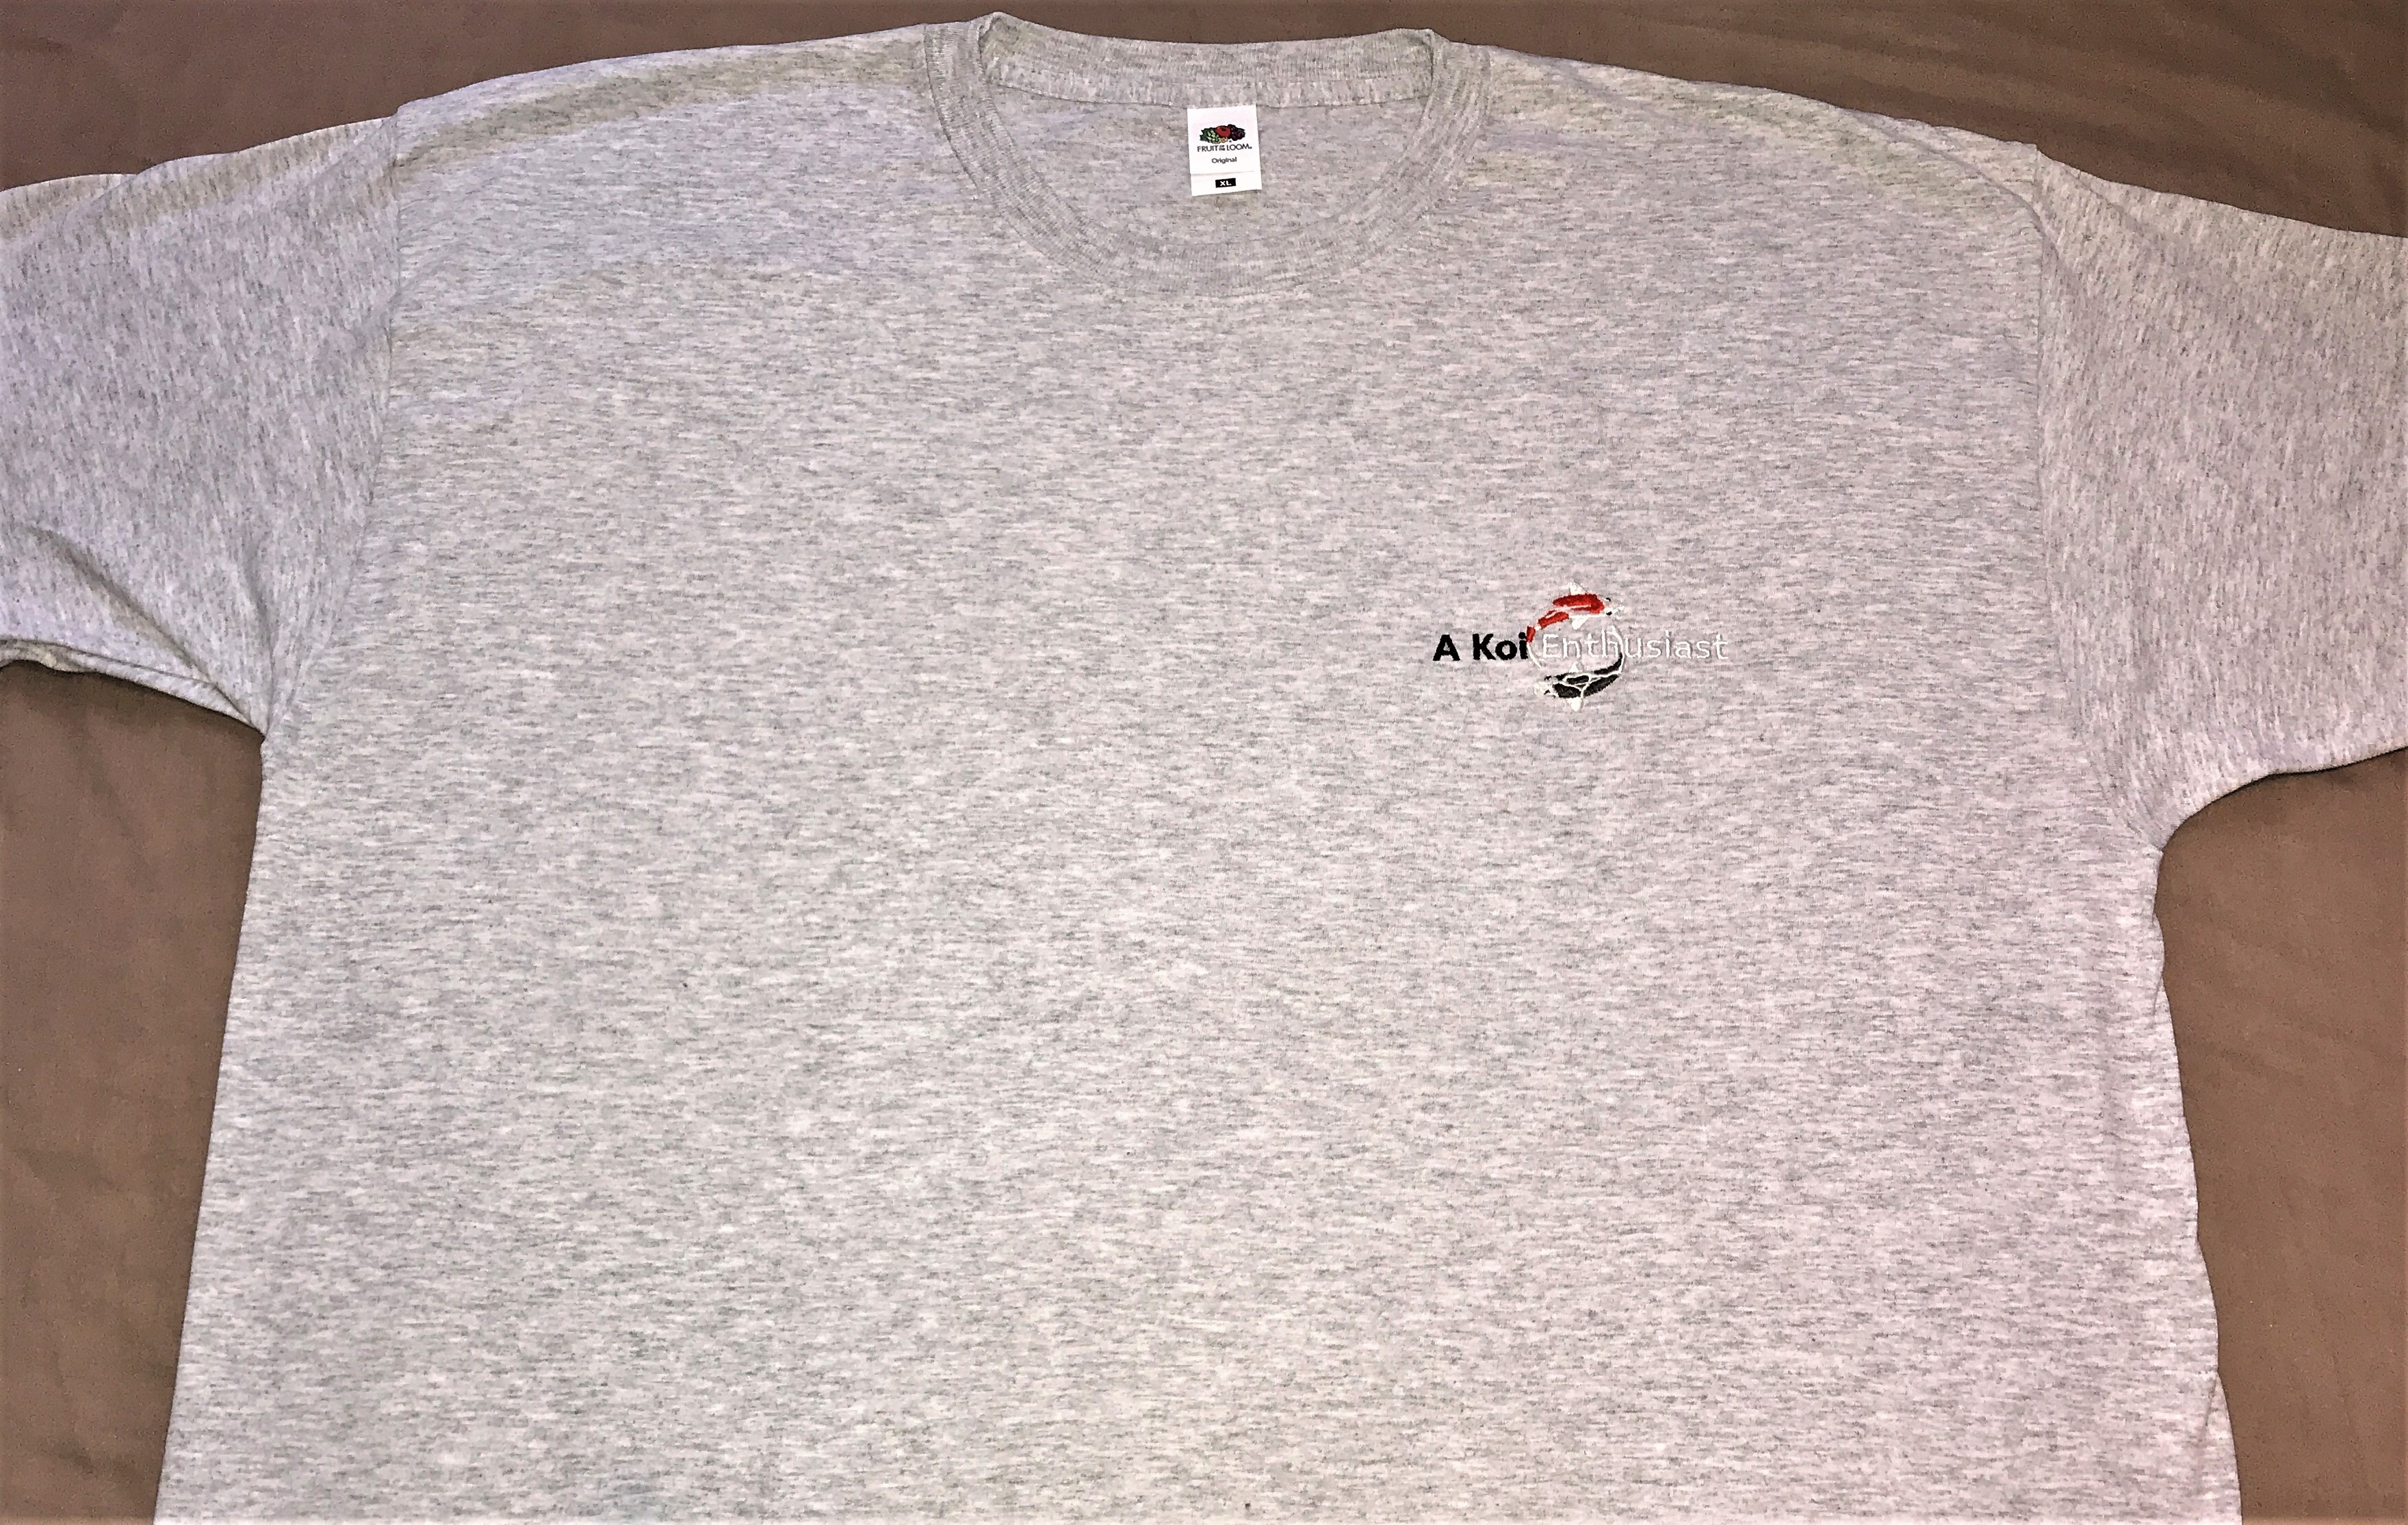 Heather Grey "A Koi Enthusiast" Embroidered Fruit of the Looms T Shirt